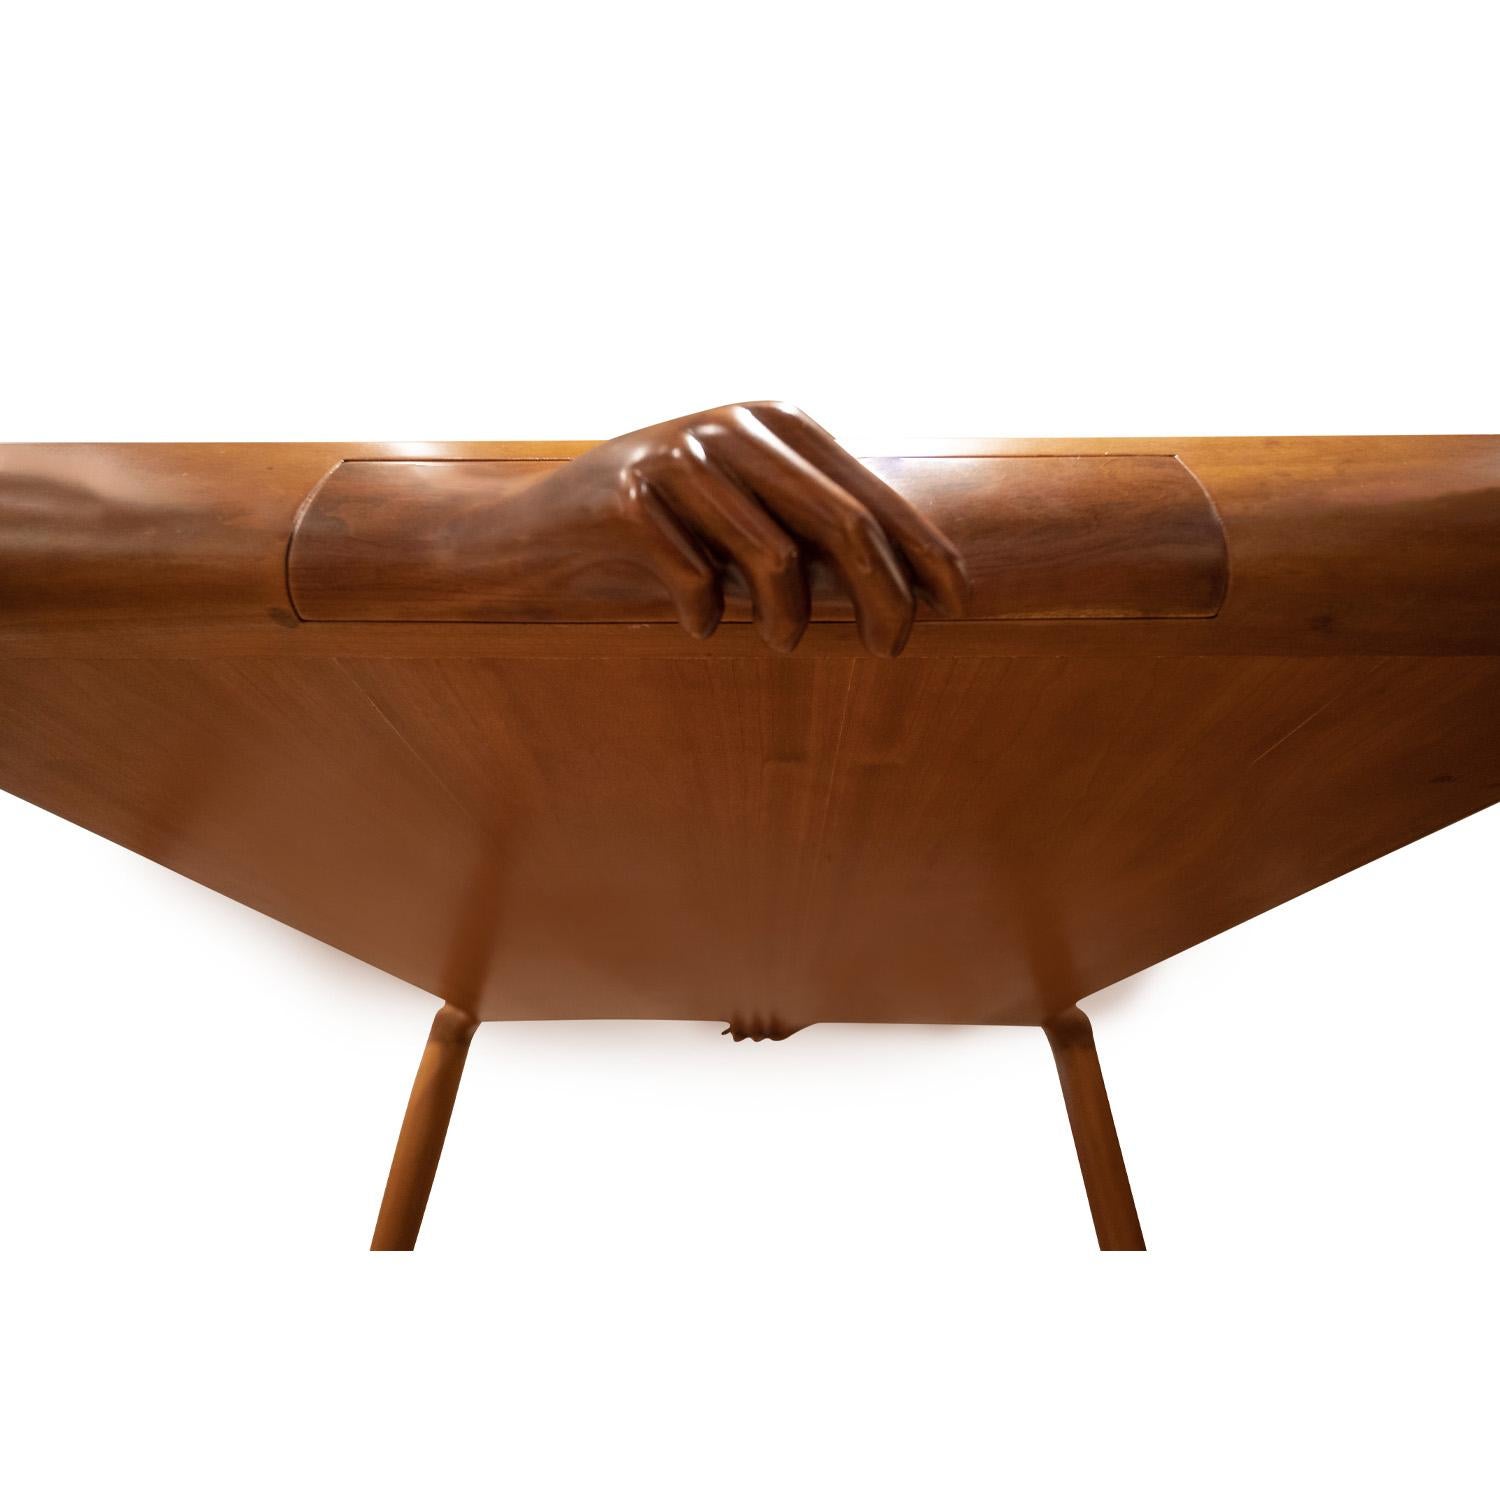 Elm Philip LaVerne Important Sculpture Game Table with Carved Hands 1966, 'Signed'